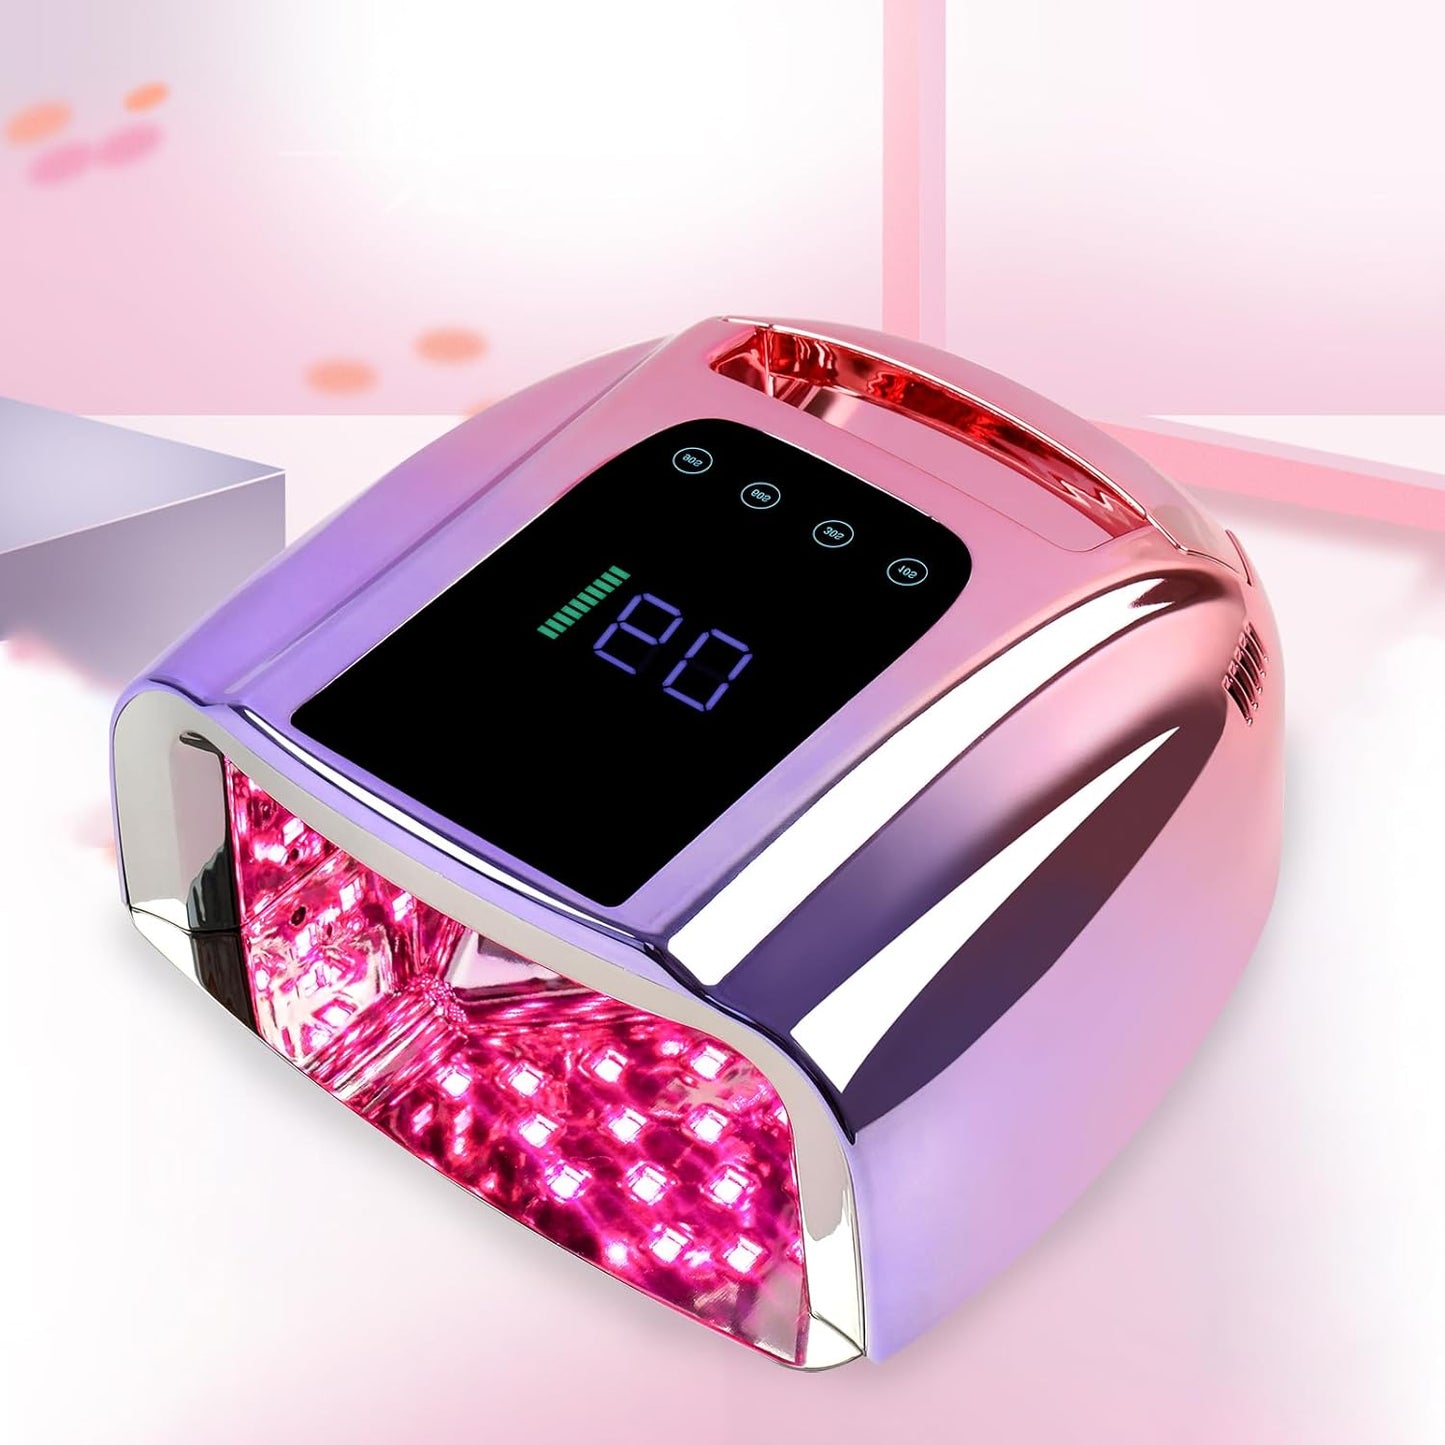 96W Rechargeable UV LED Nail Lamp,Portable Cordless UV Light for Nails with LCD Display Auto Sensor